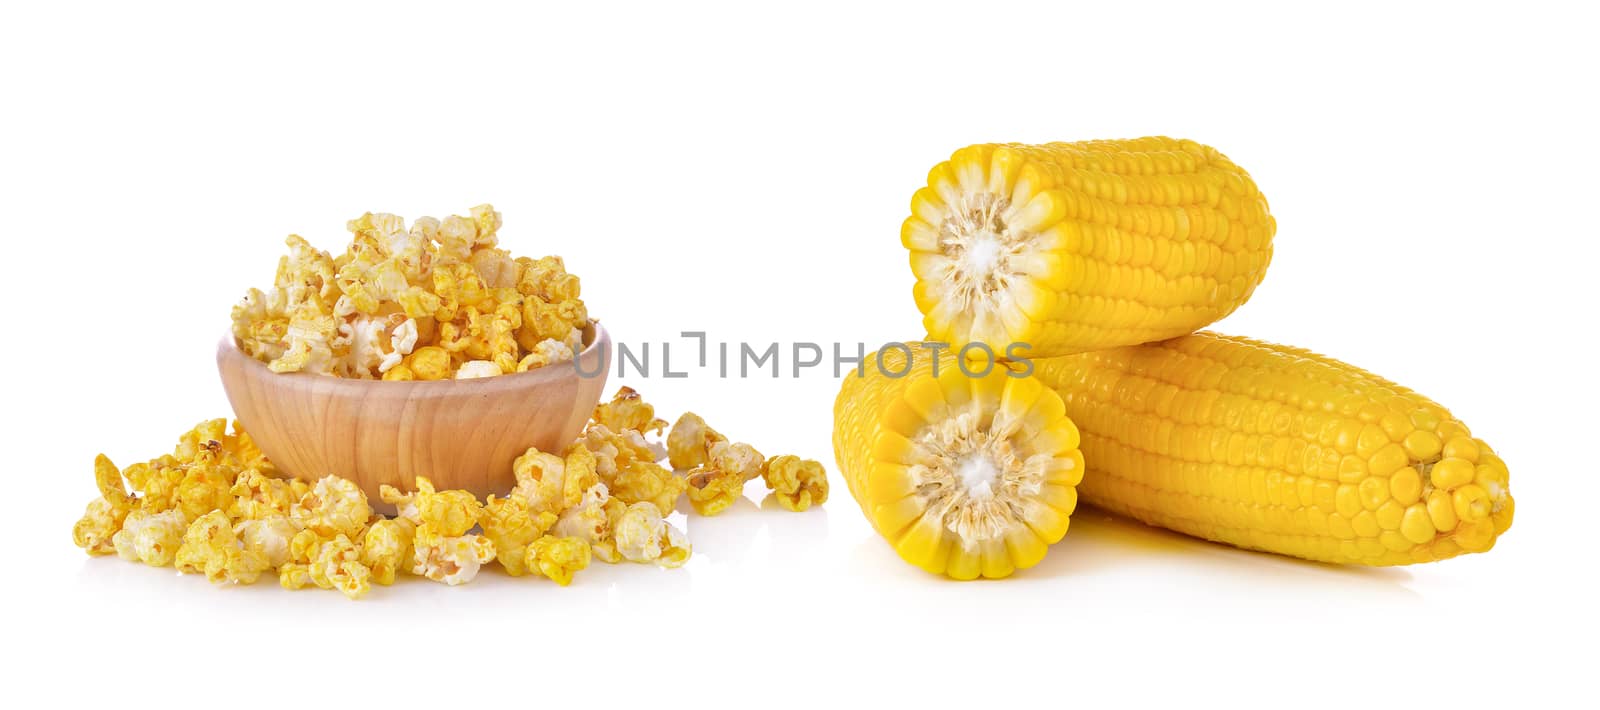 corn and Pop Corn on white background by sommai